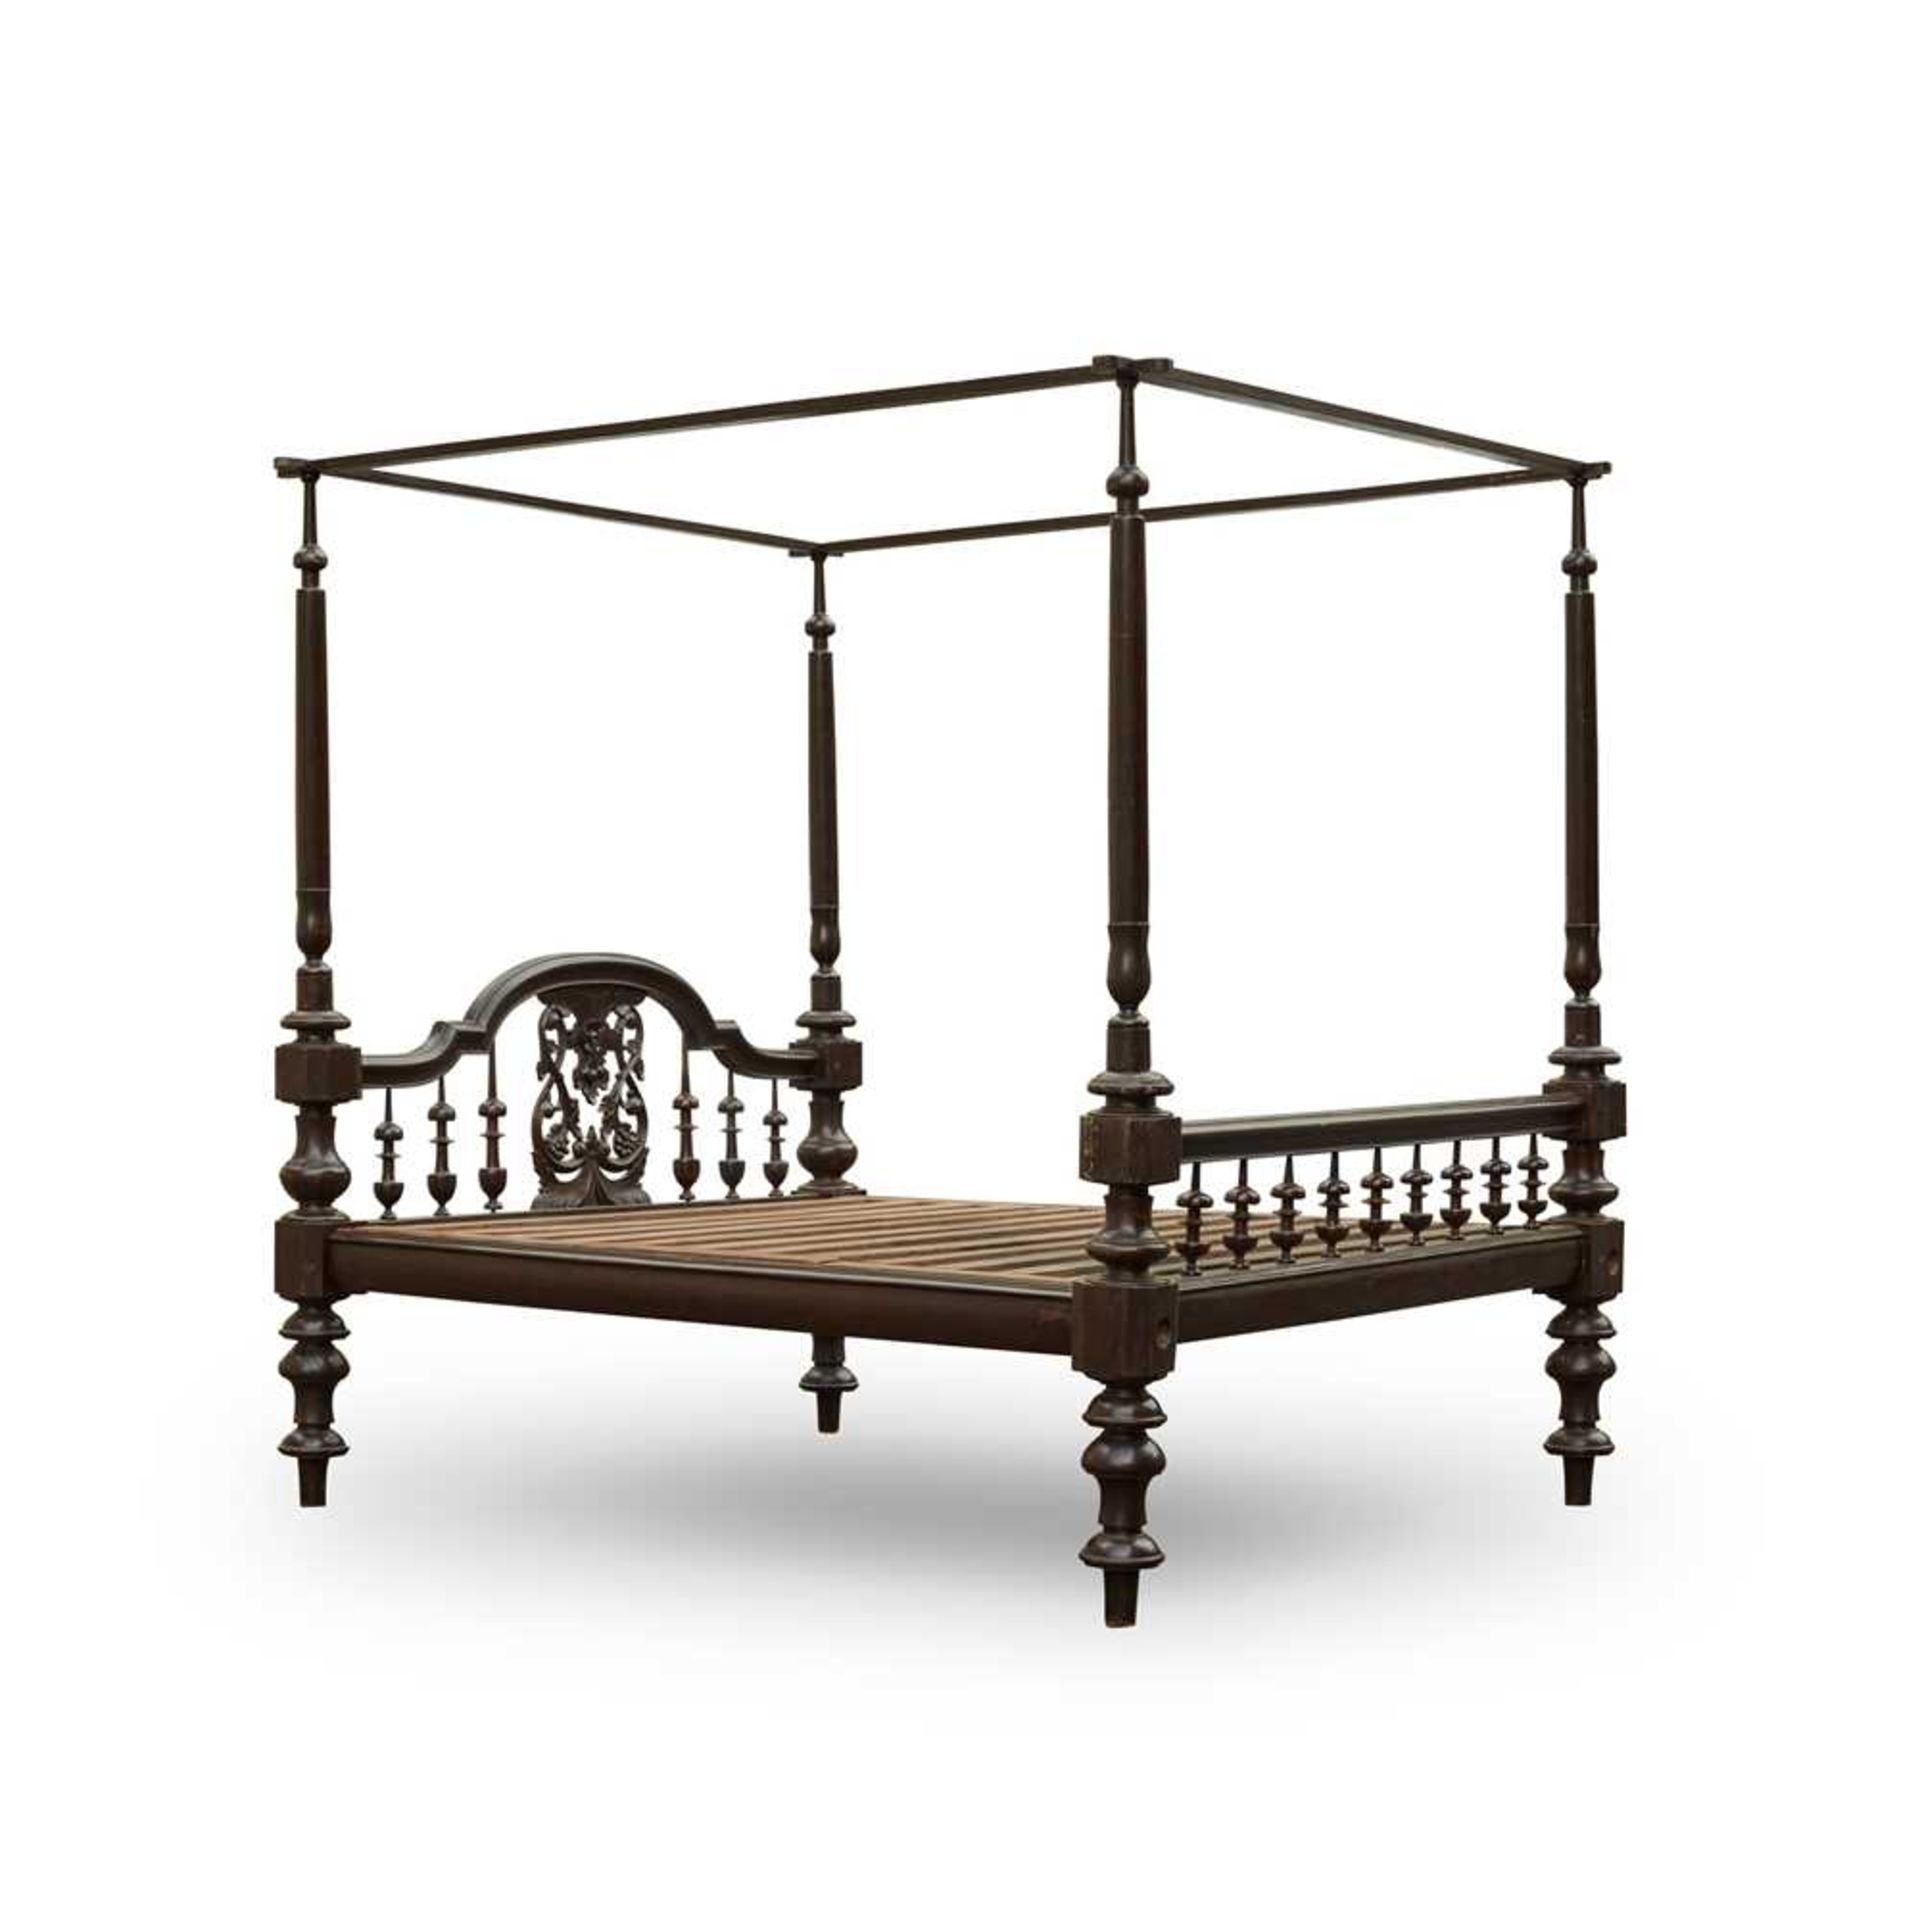 INDO-DUTCH COLONIAL CARVED AND EBONISED FOUR POSTER BED 19TH CENTURY, PROBABLY CEYLON